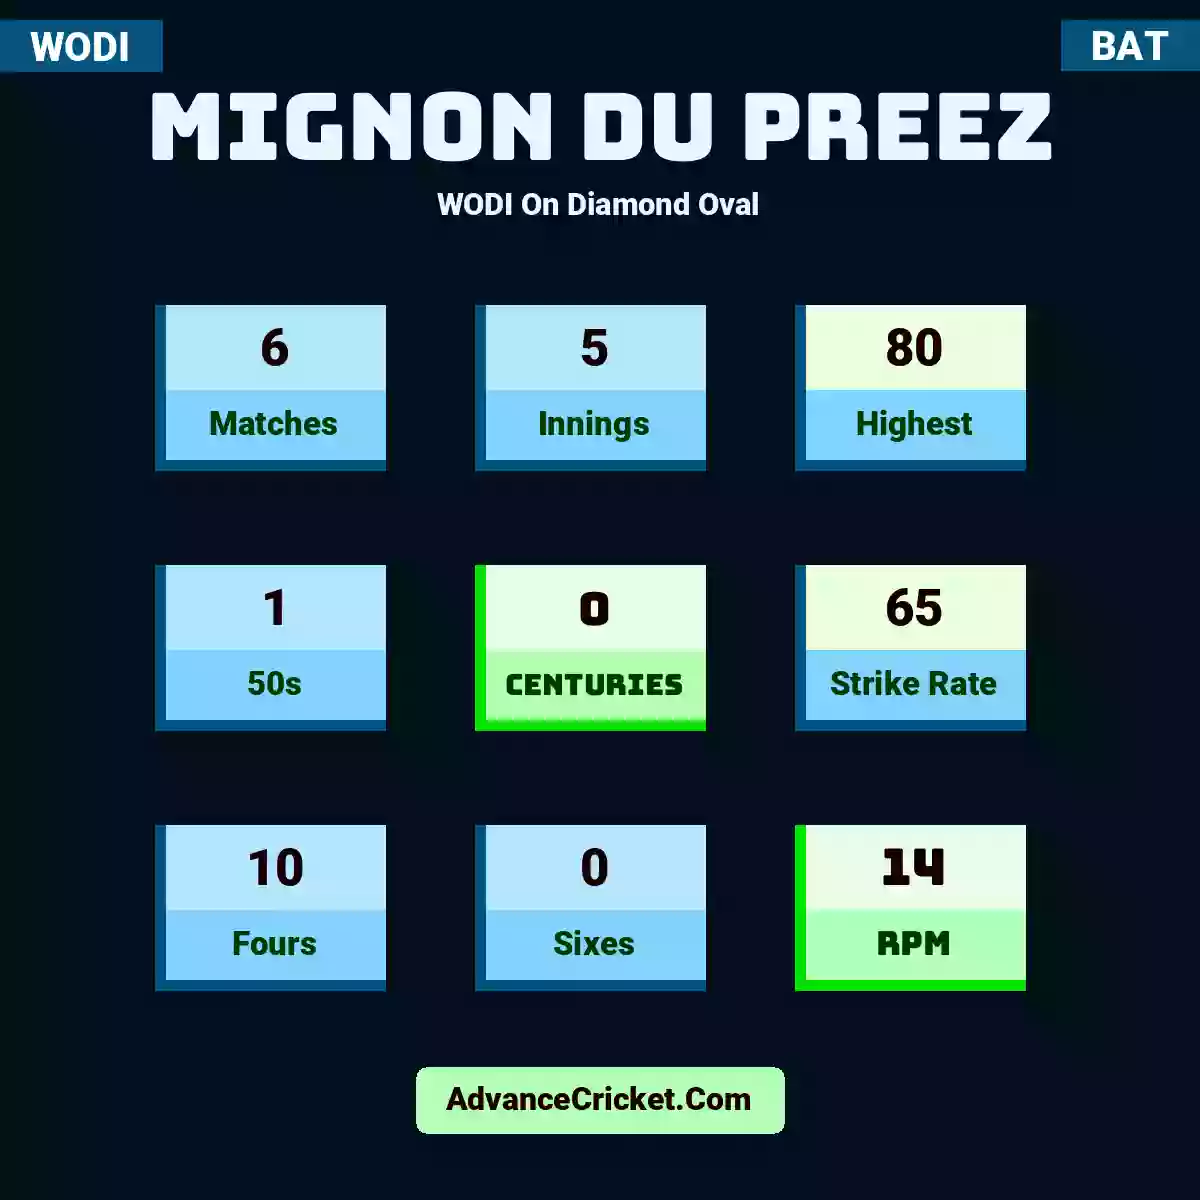 Mignon du Preez WODI  On Diamond Oval, Mignon du Preez played 6 matches, scored 80 runs as highest, 1 half-centuries, and 0 centuries, with a strike rate of 65. M.Preez hit 10 fours and 0 sixes, with an RPM of 14.